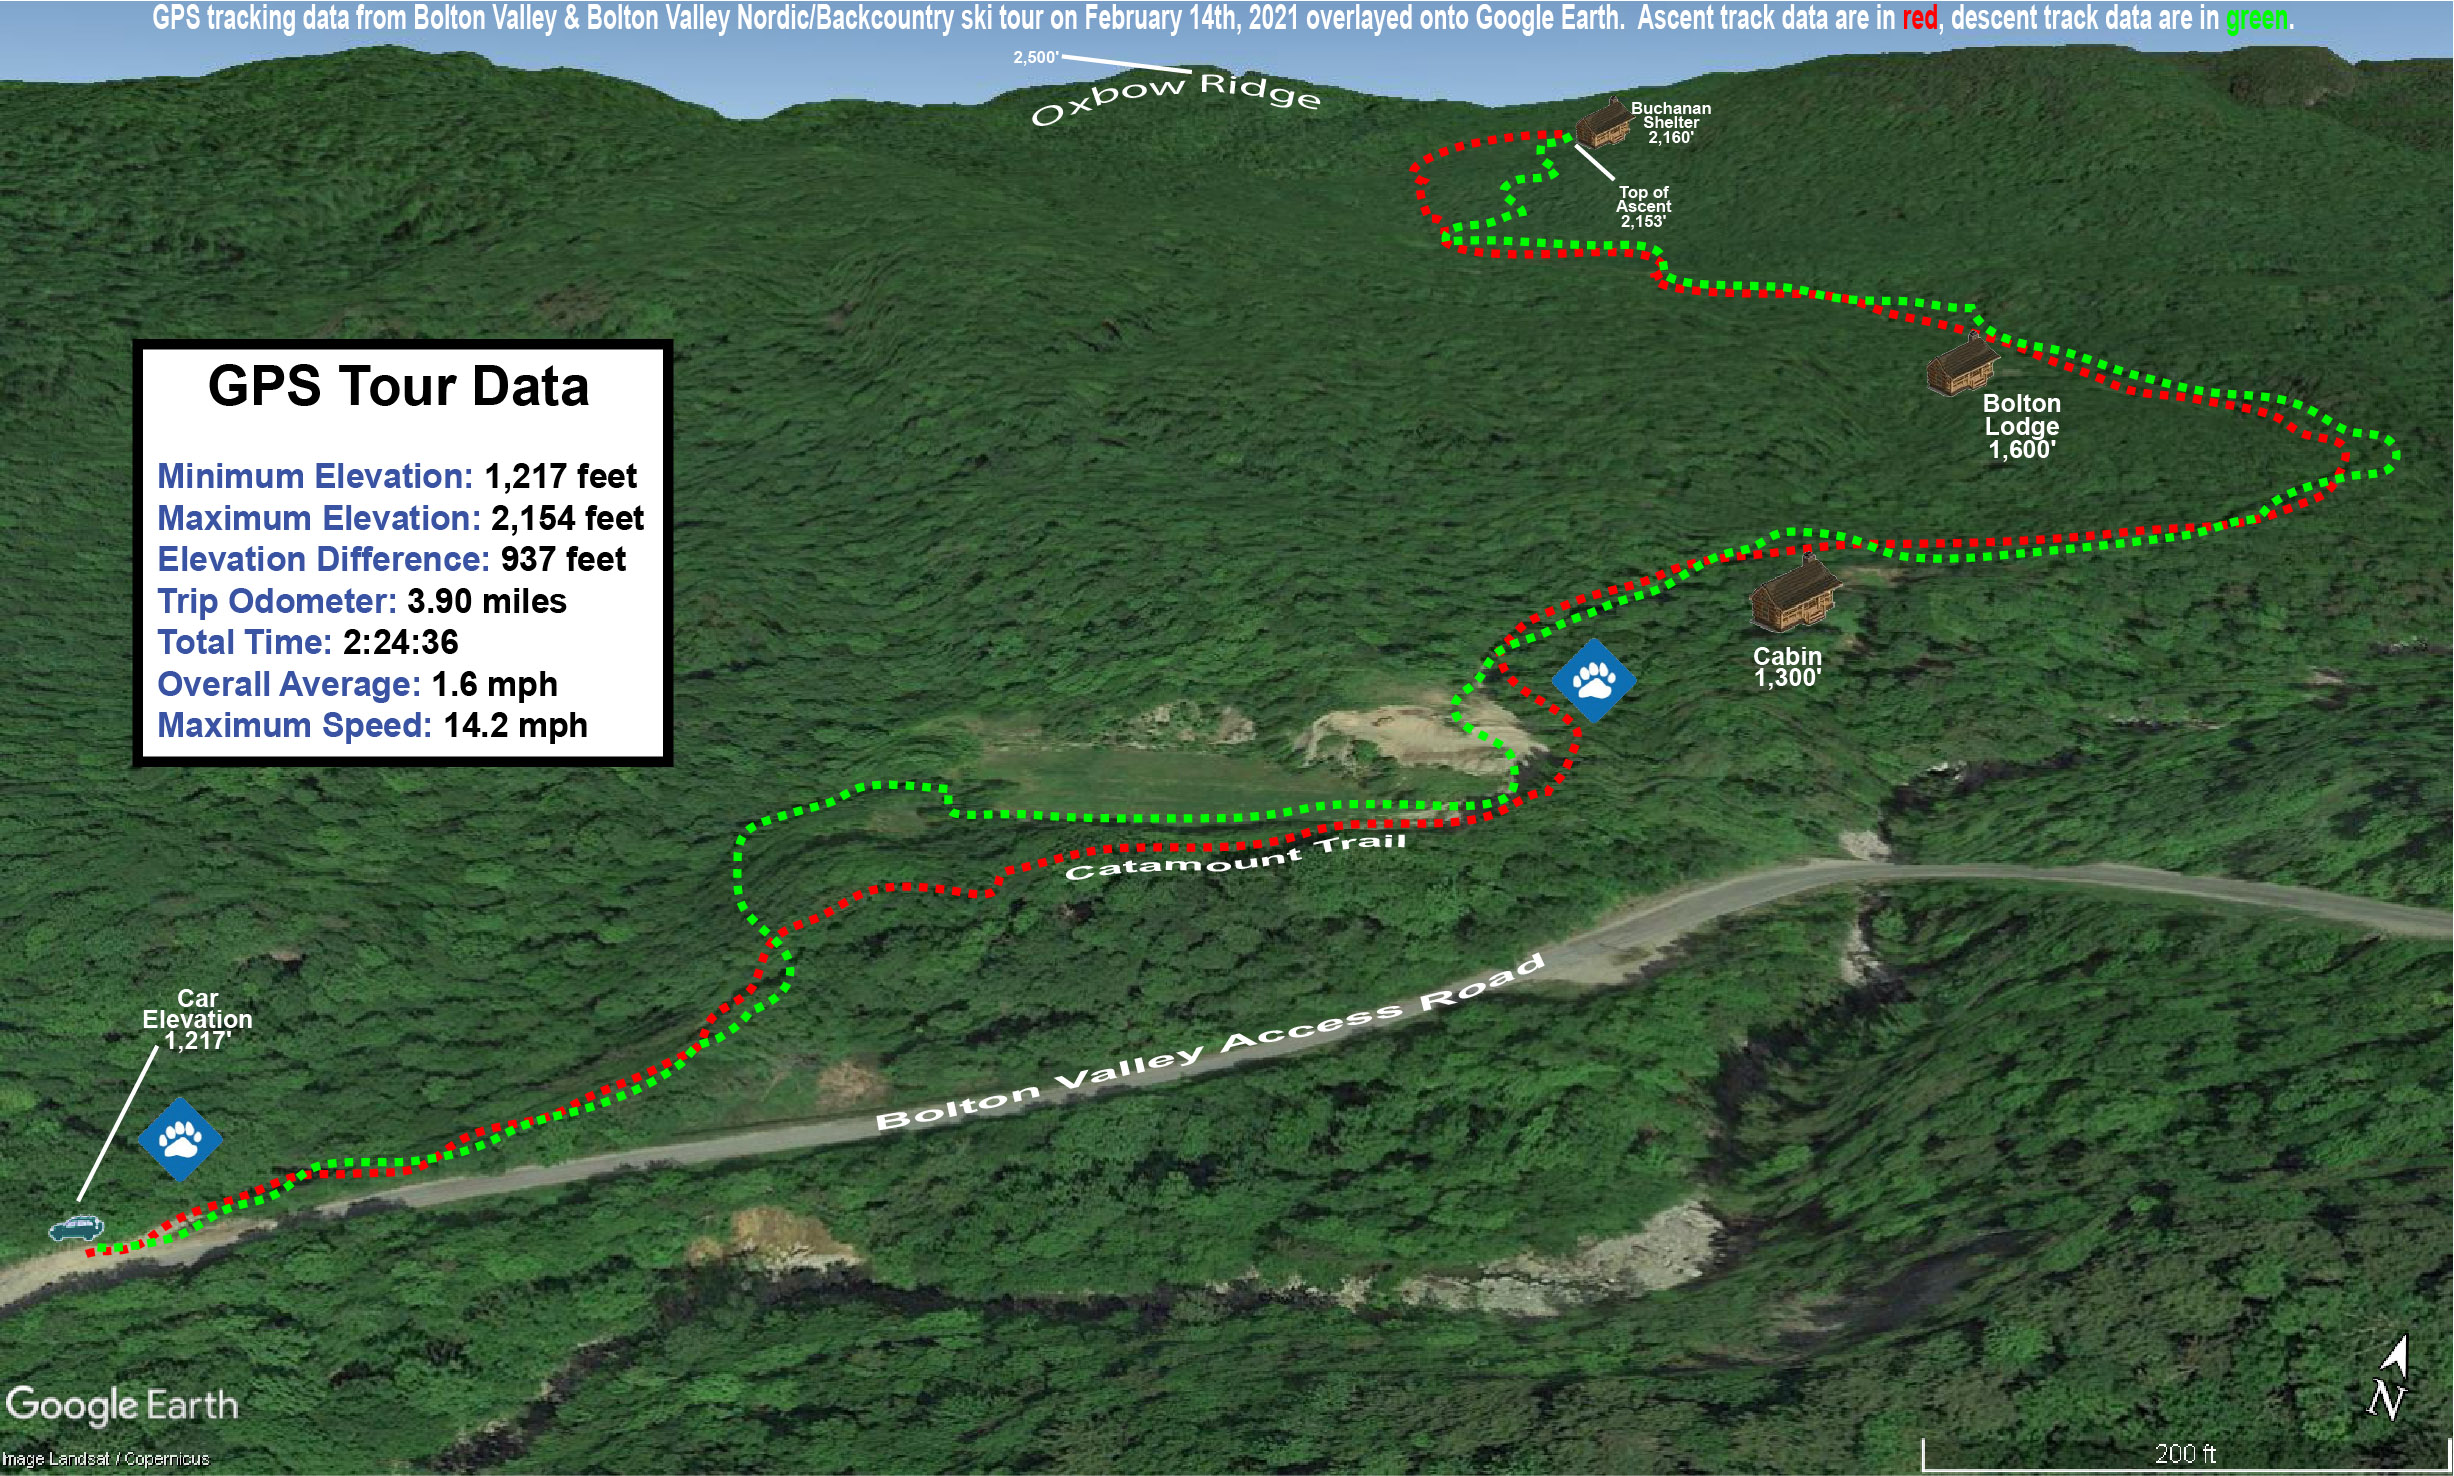 A Google Earth map showing GPS tracking data for a ski tour on the Nordic & Backcountry Network at Bolton Valley Resort in Vermont